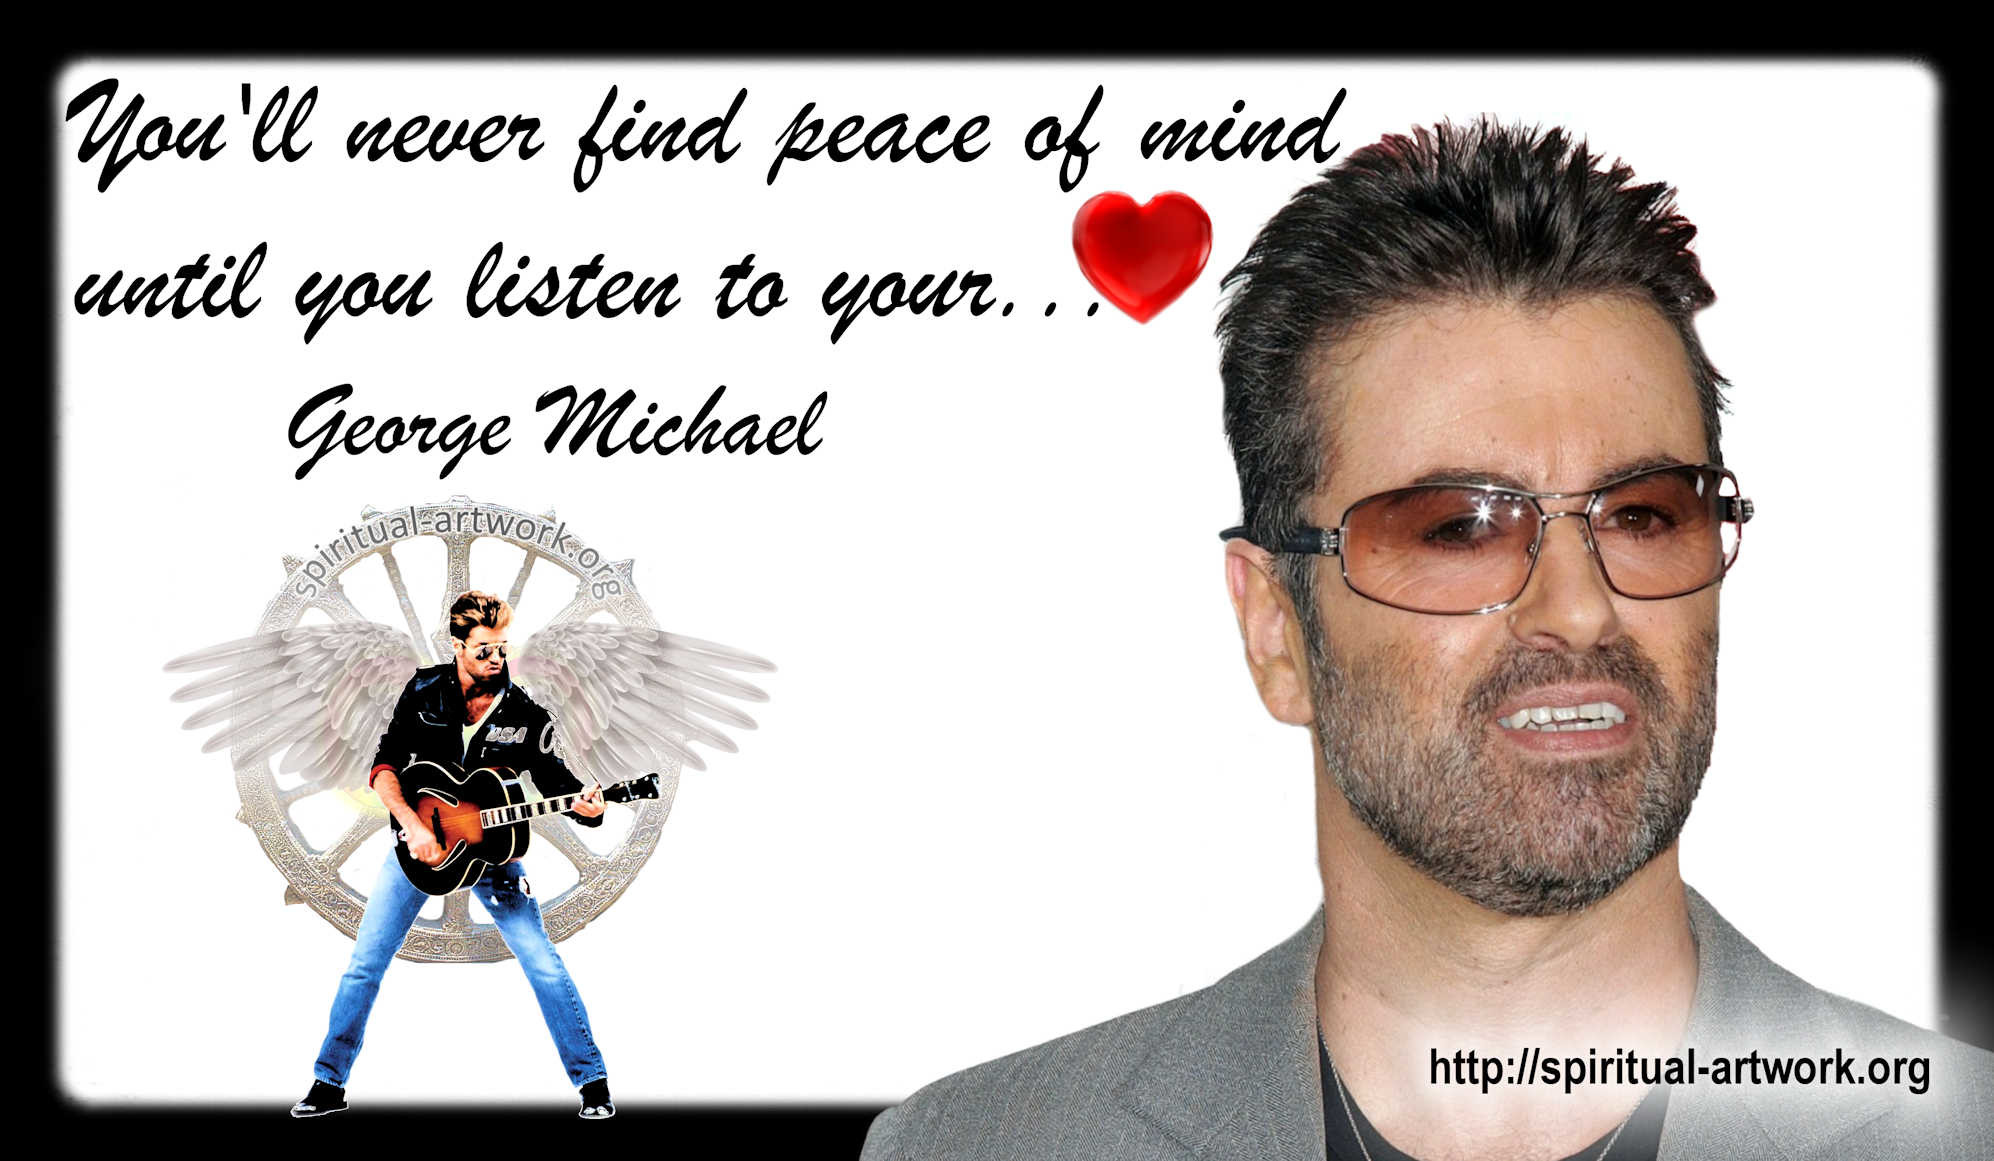 1994x1161 George Michael- You'll never find peace of mind until you listen to your